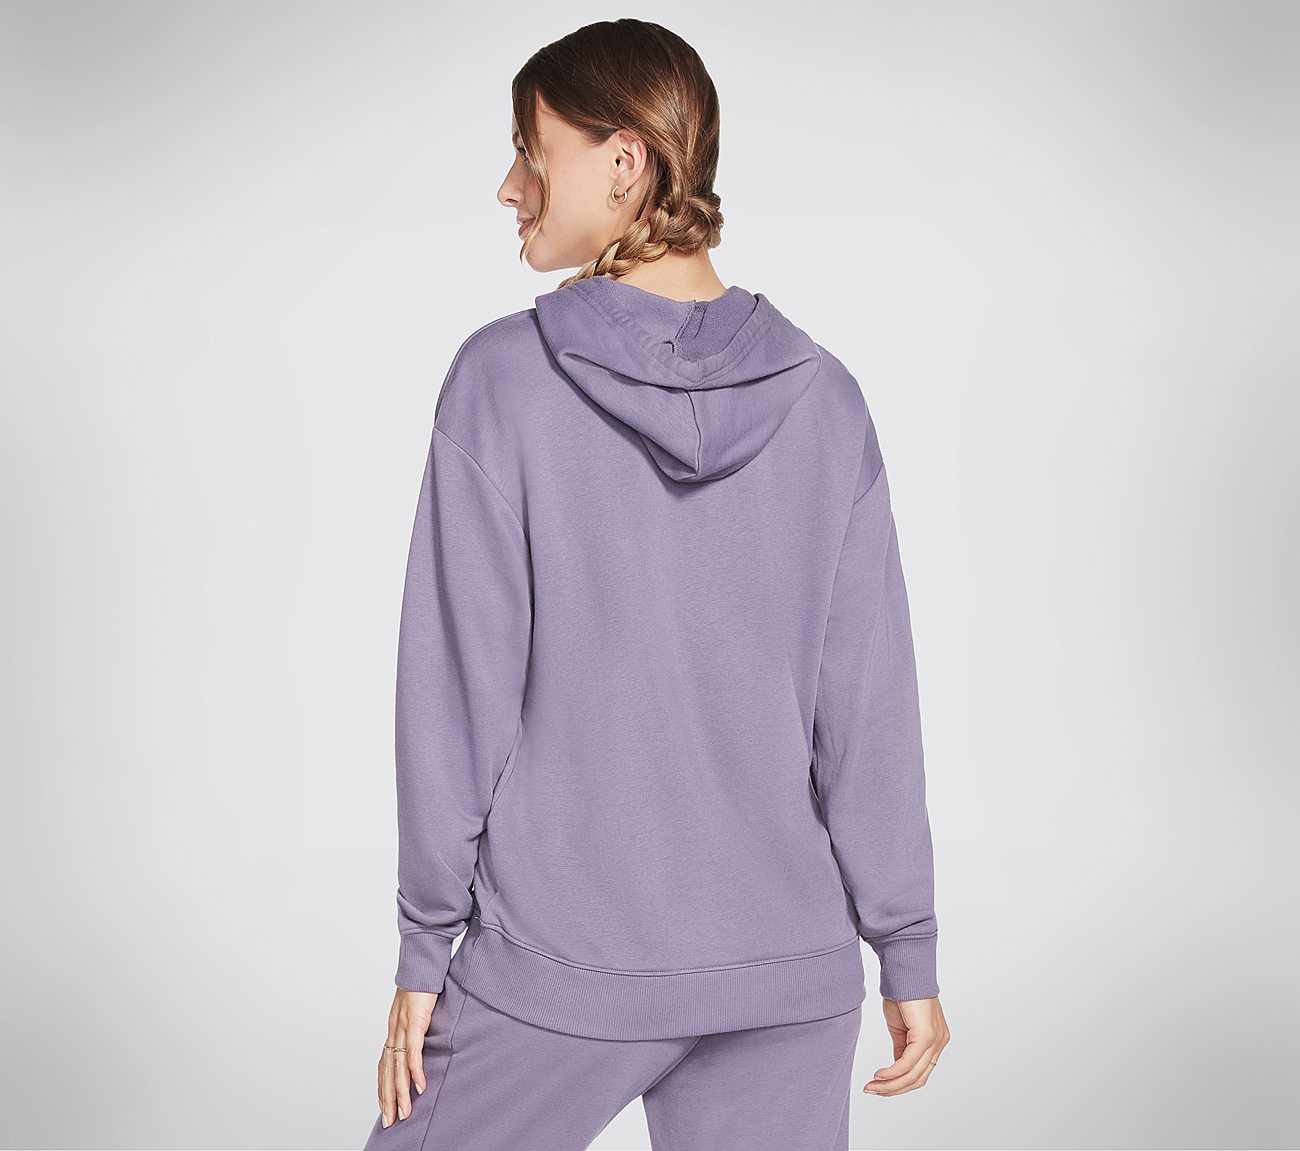 DAWG POUCH P/O HOODIE, GREY/PURPLE Apparels Top View